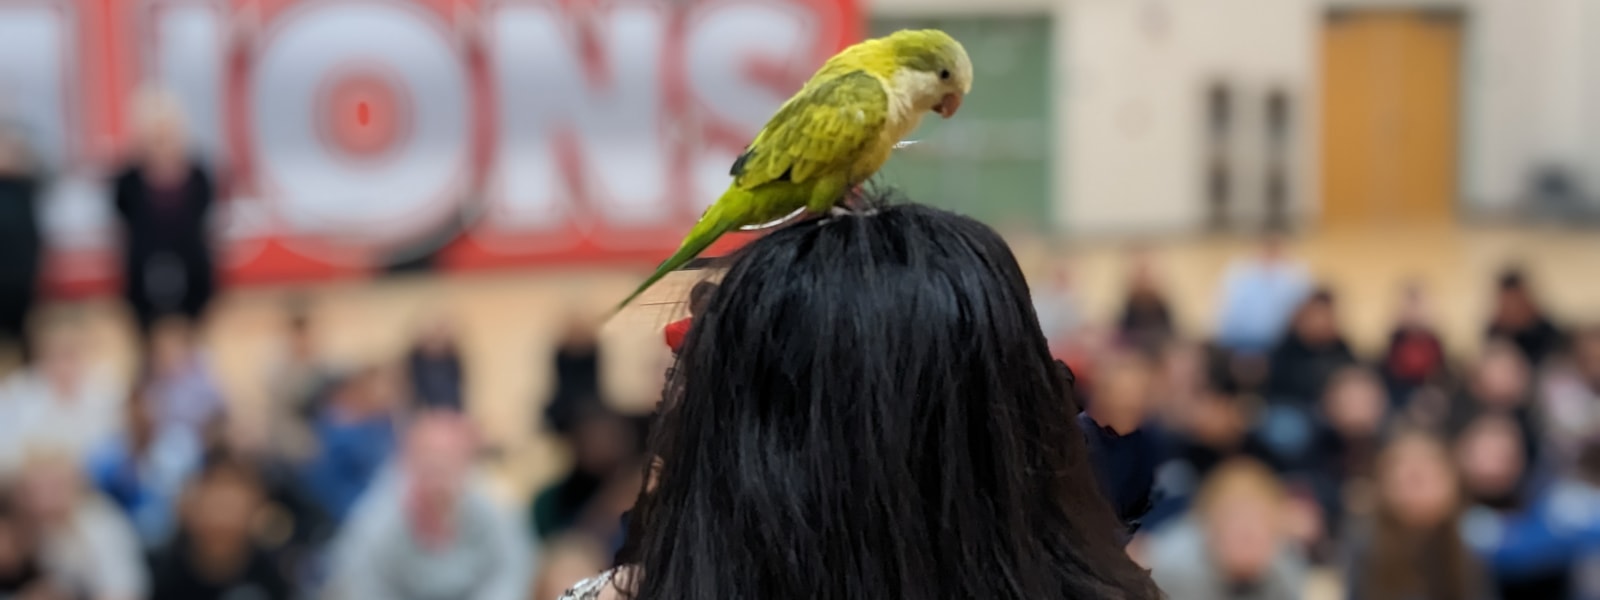 green parrot on top of zoo keepers' head